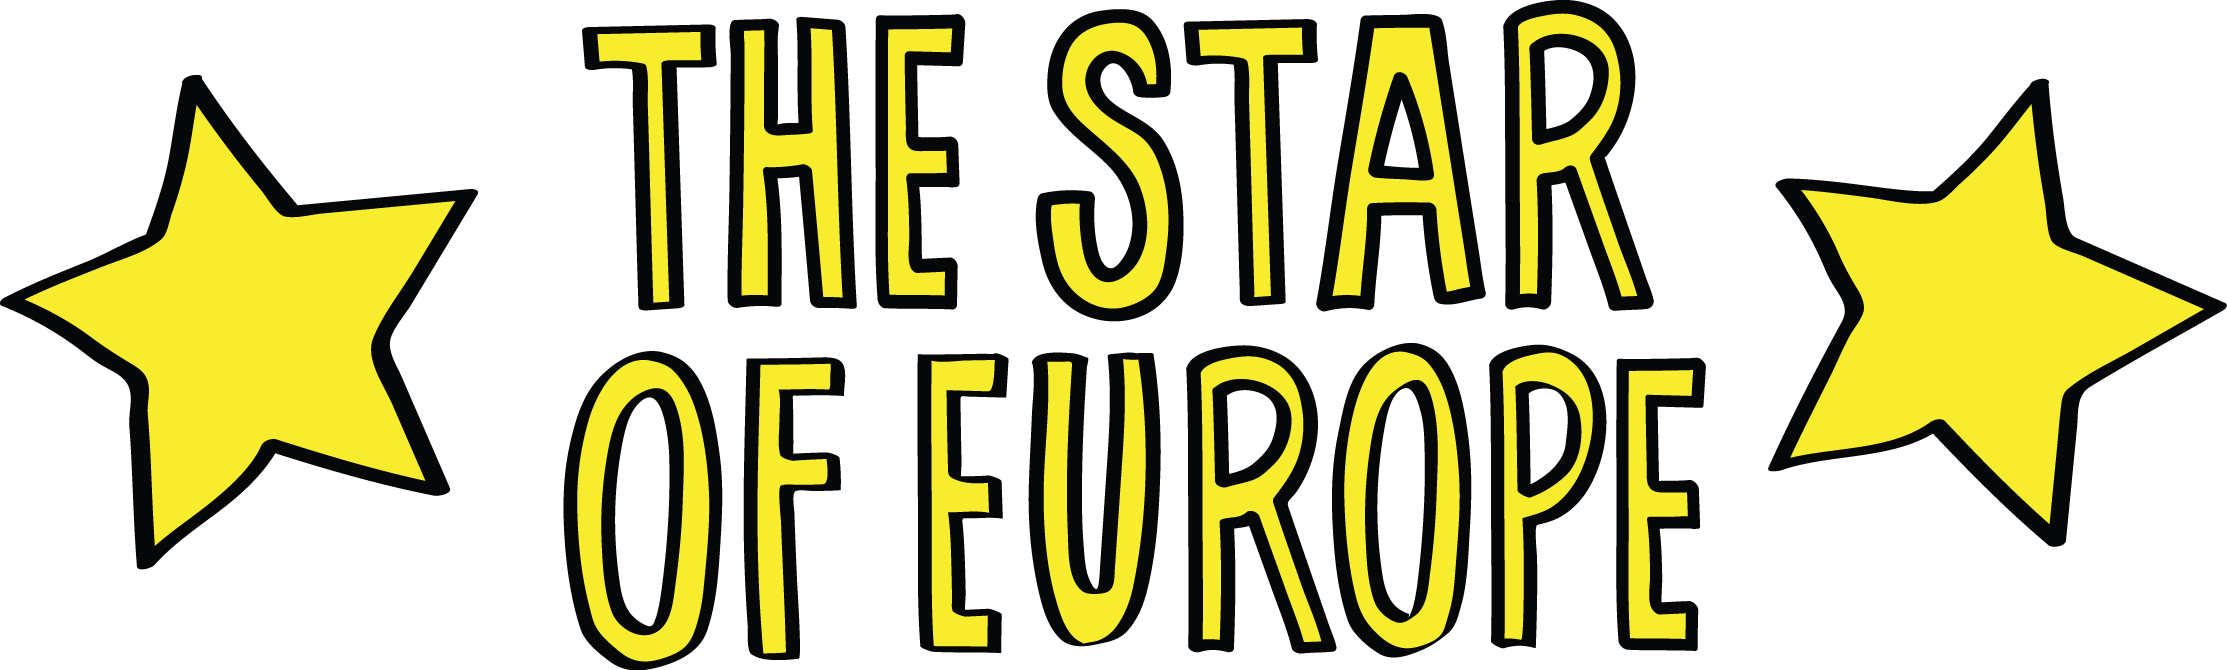 The Star of Europe